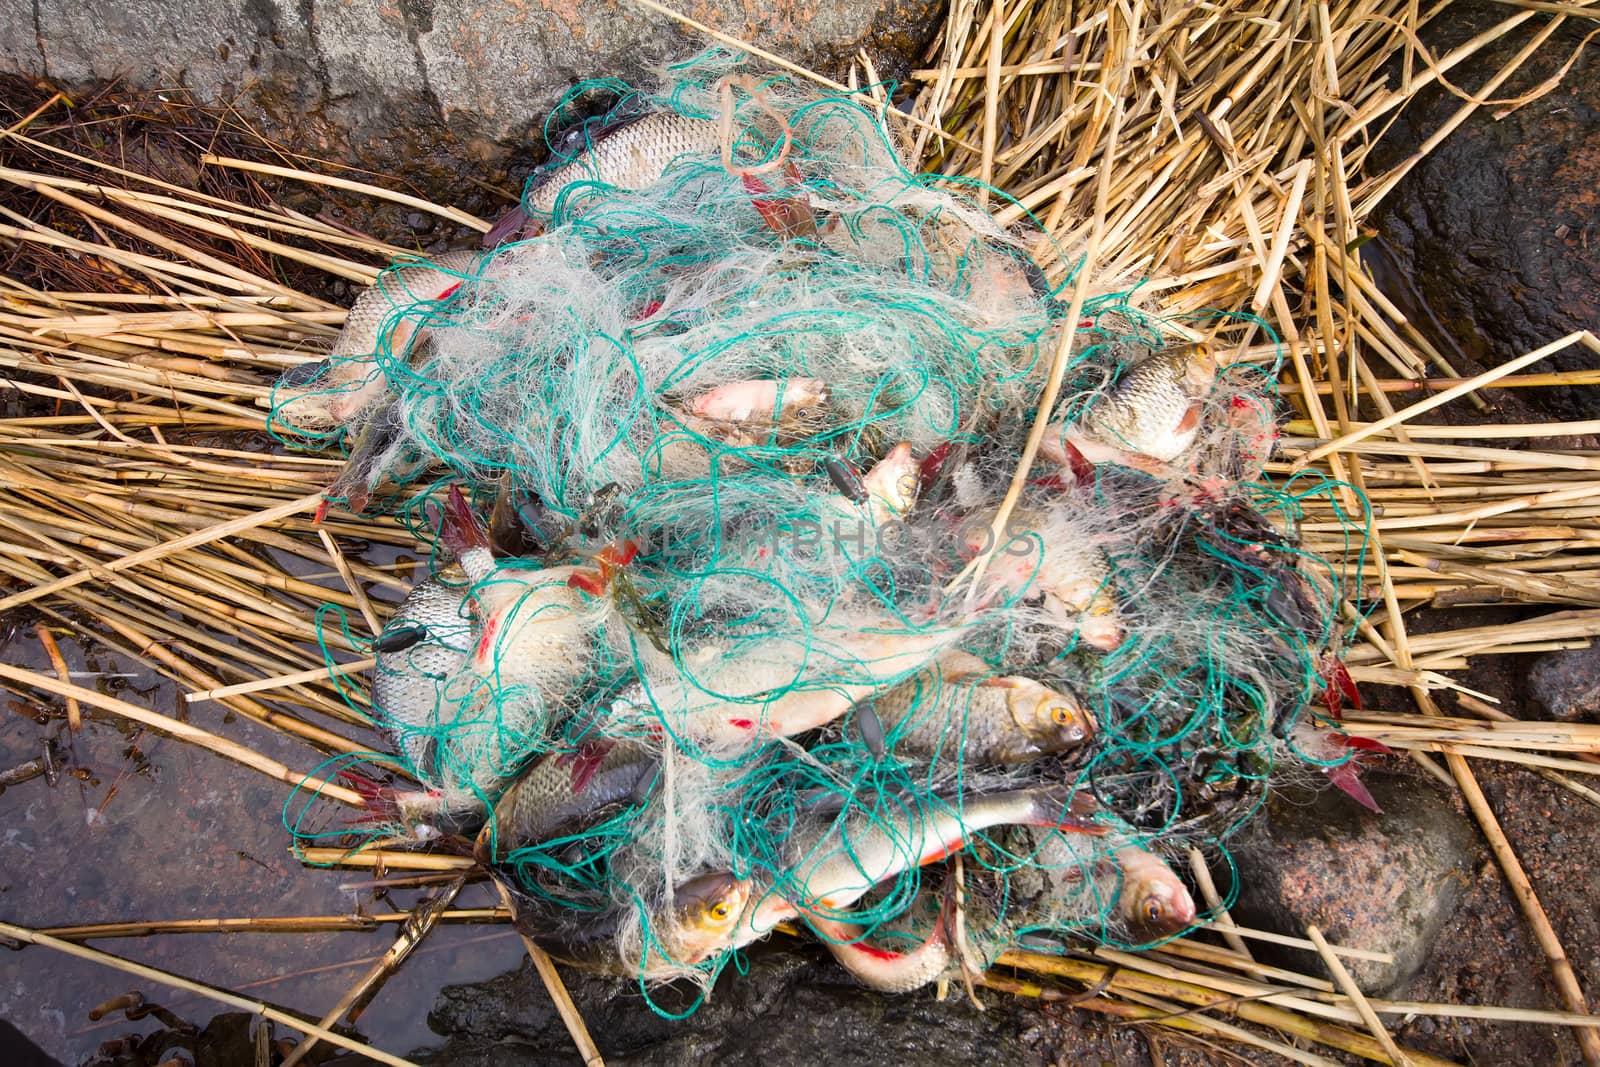 many fish have been caught in the net